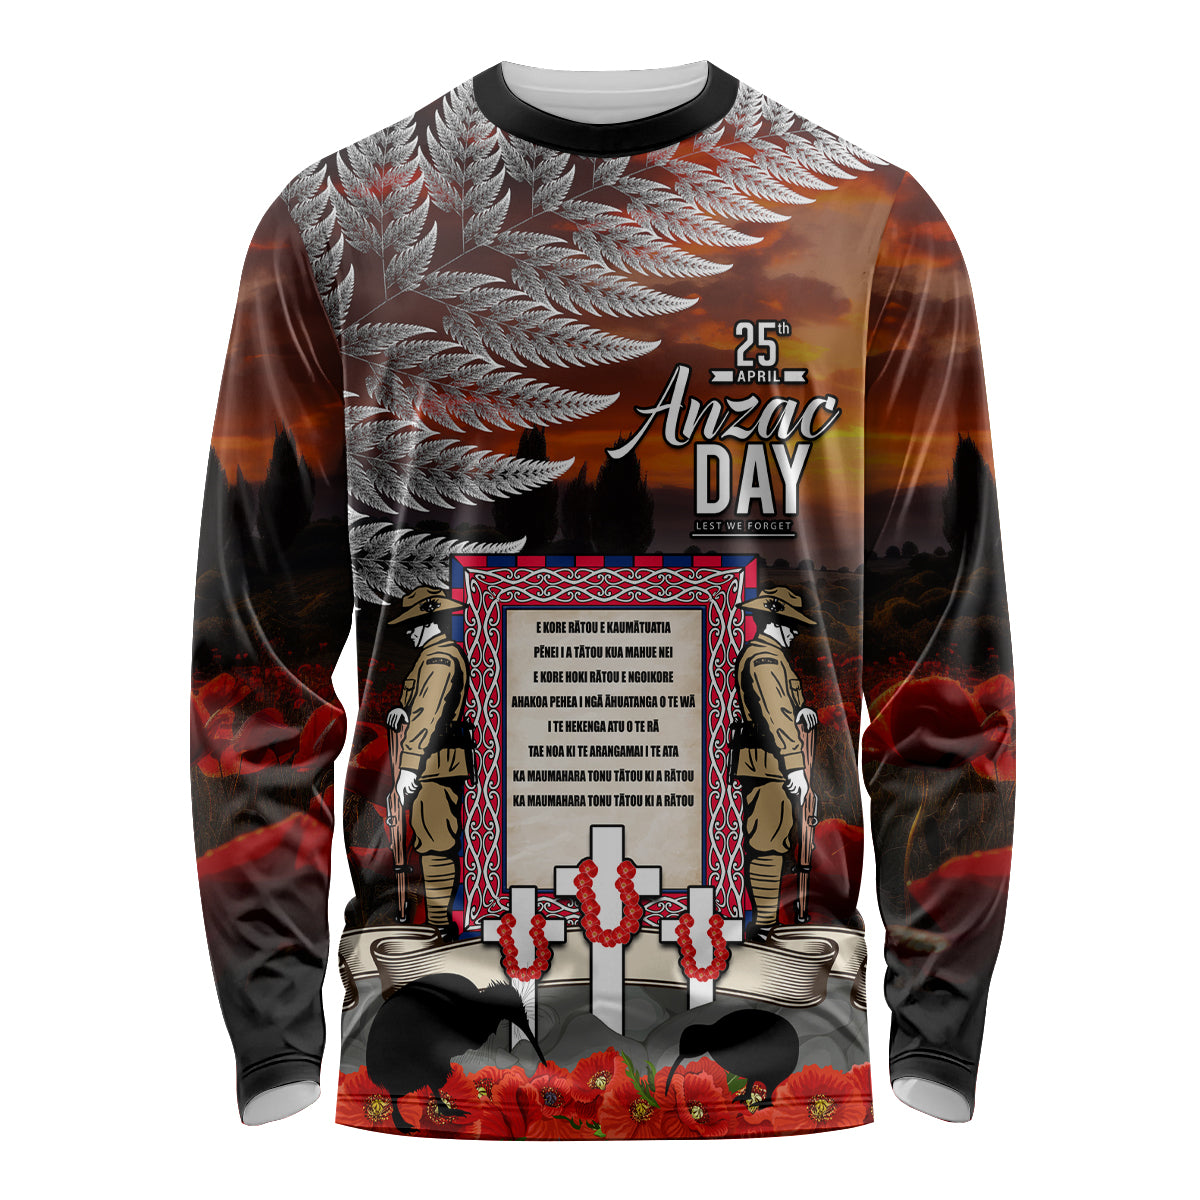 New Zealand ANZAC Day Long Sleeve Shirt The Ode of Remembrance and Silver Fern LT03 Unisex Black - Polynesian Pride